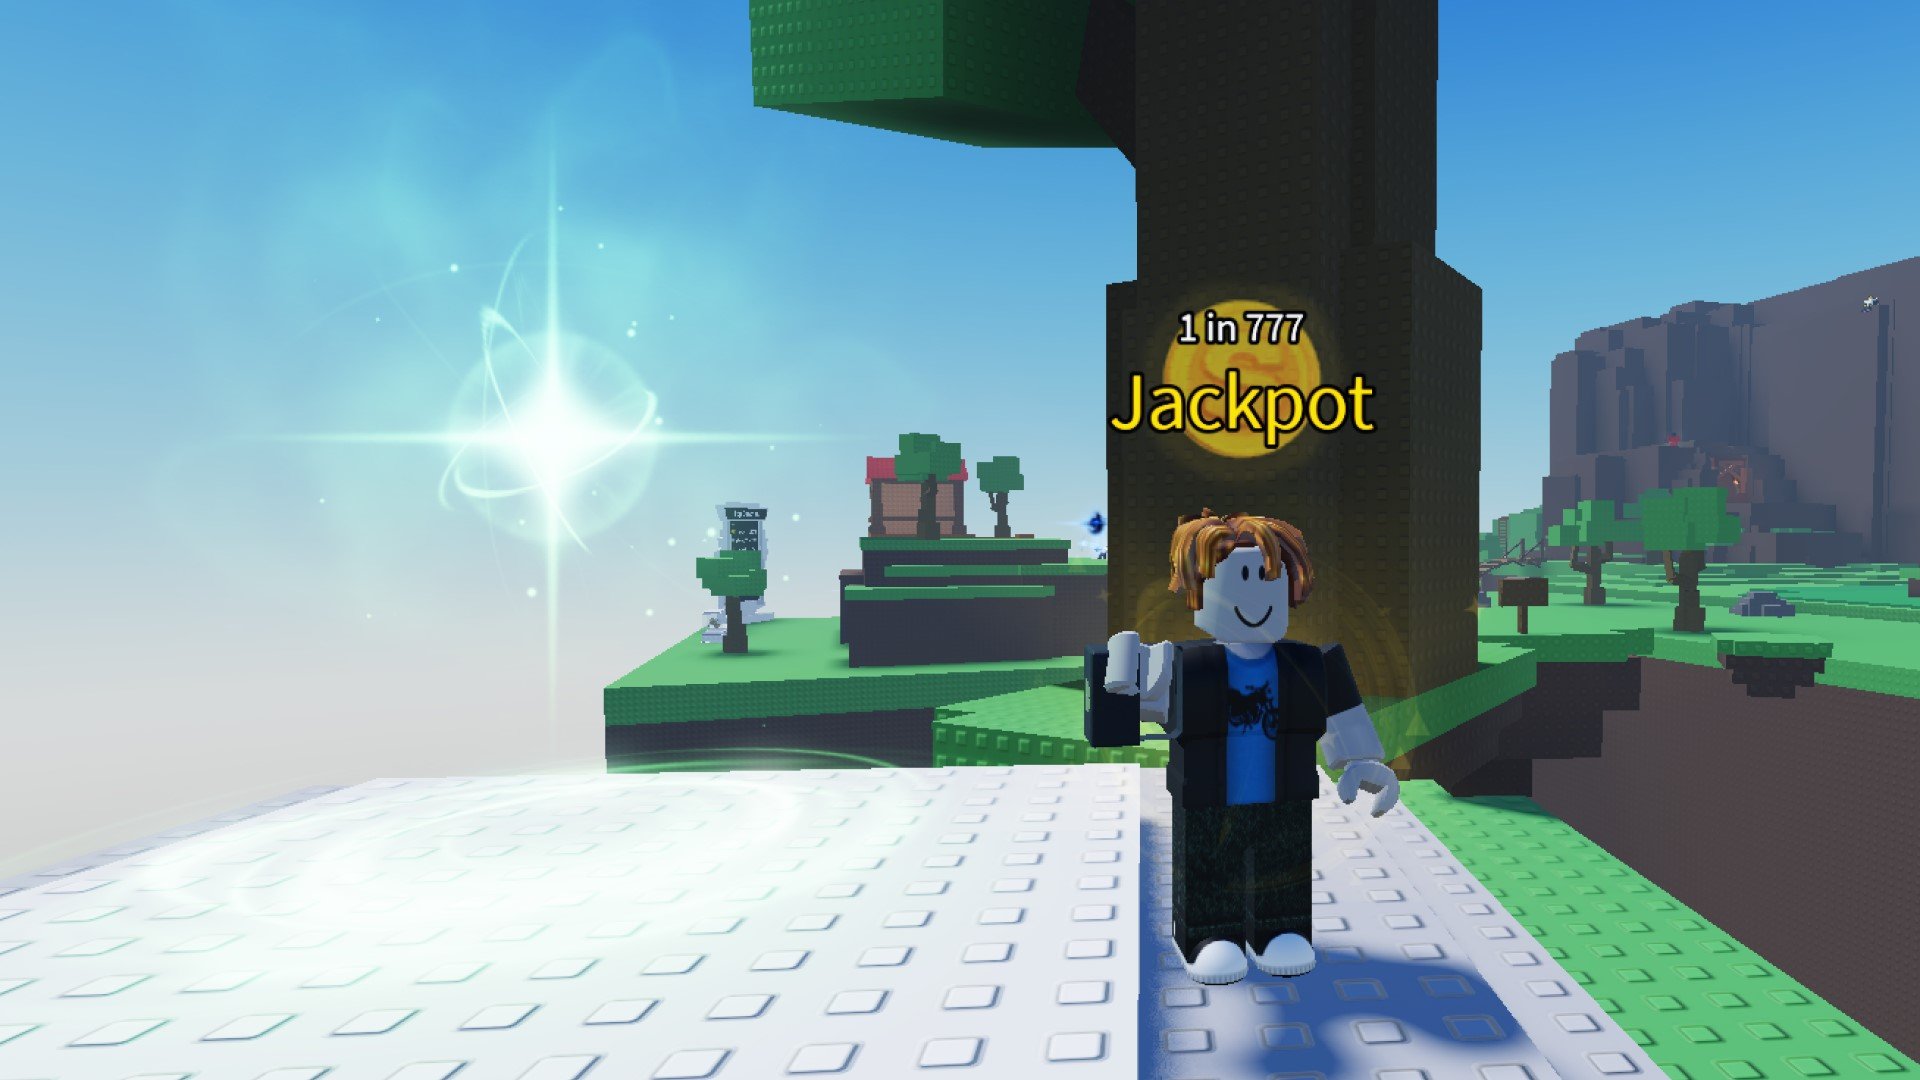 A character from Roblox game Sols rNG standing next to a green light. They have the Jackpot Aura equipped, and a tall tree stands in the background.